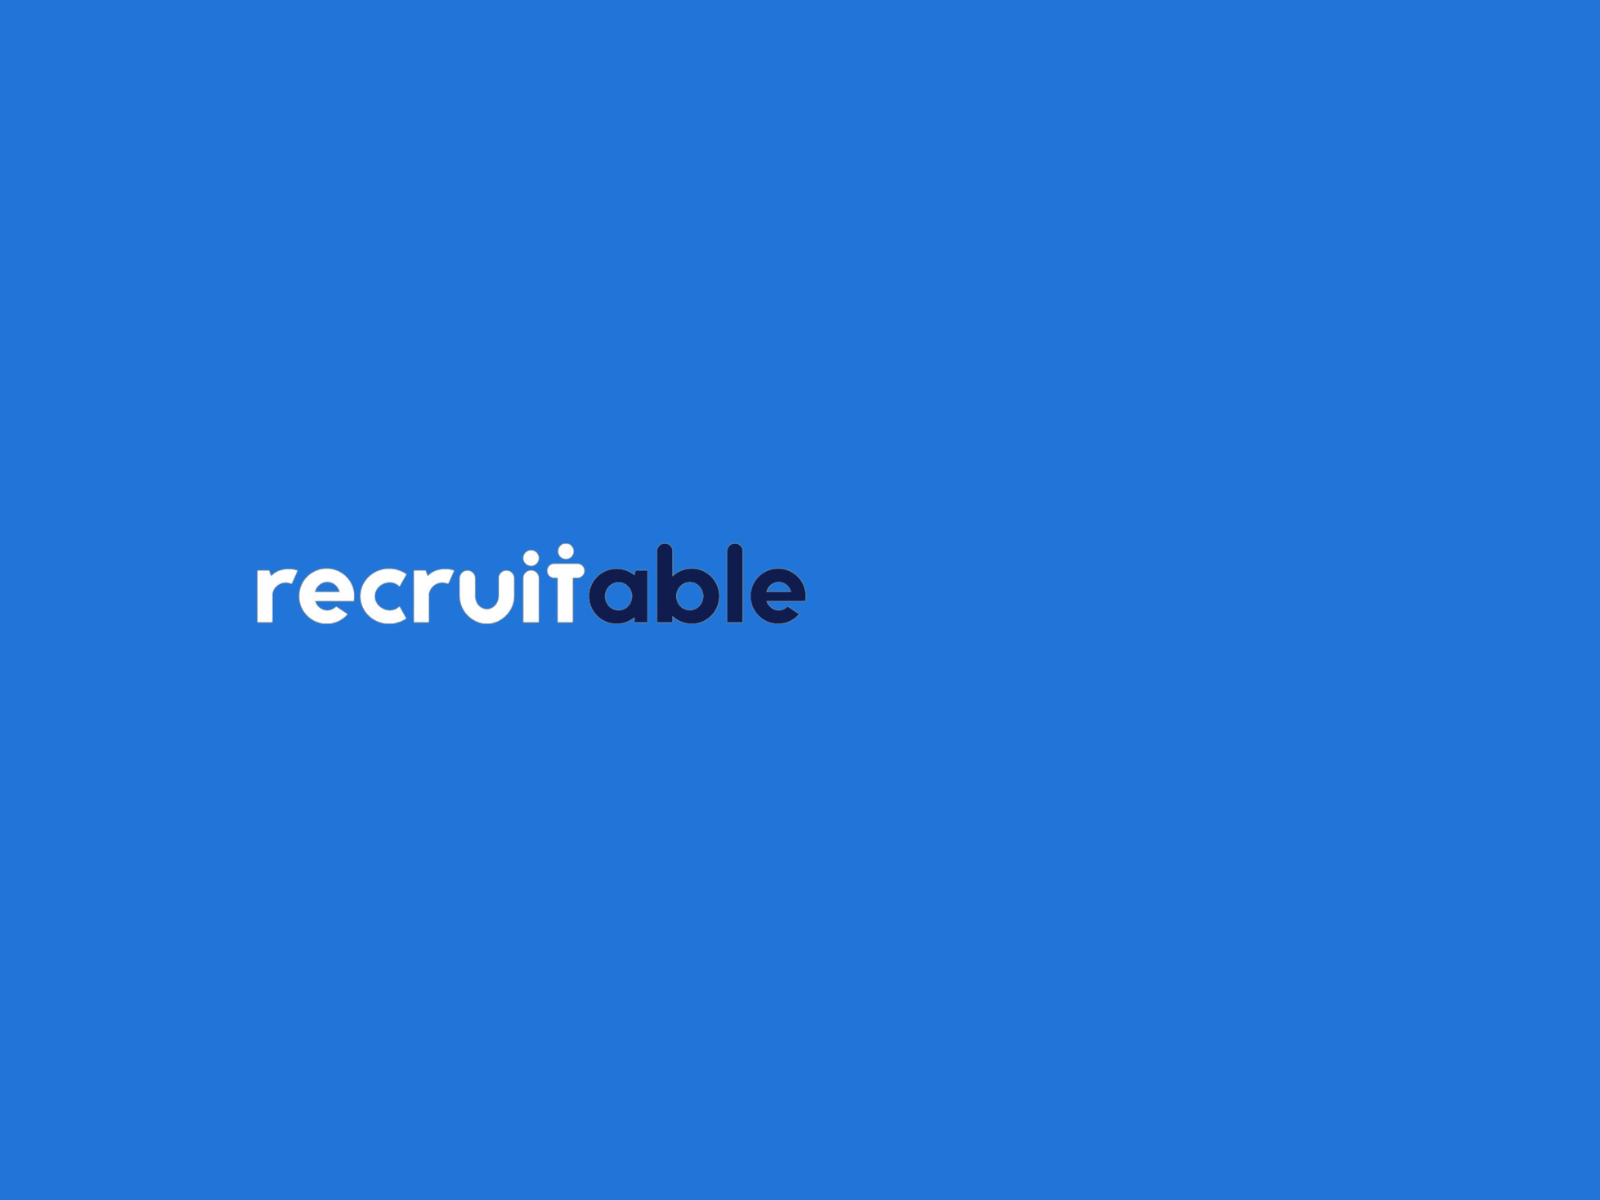 recruitable logo with blue background